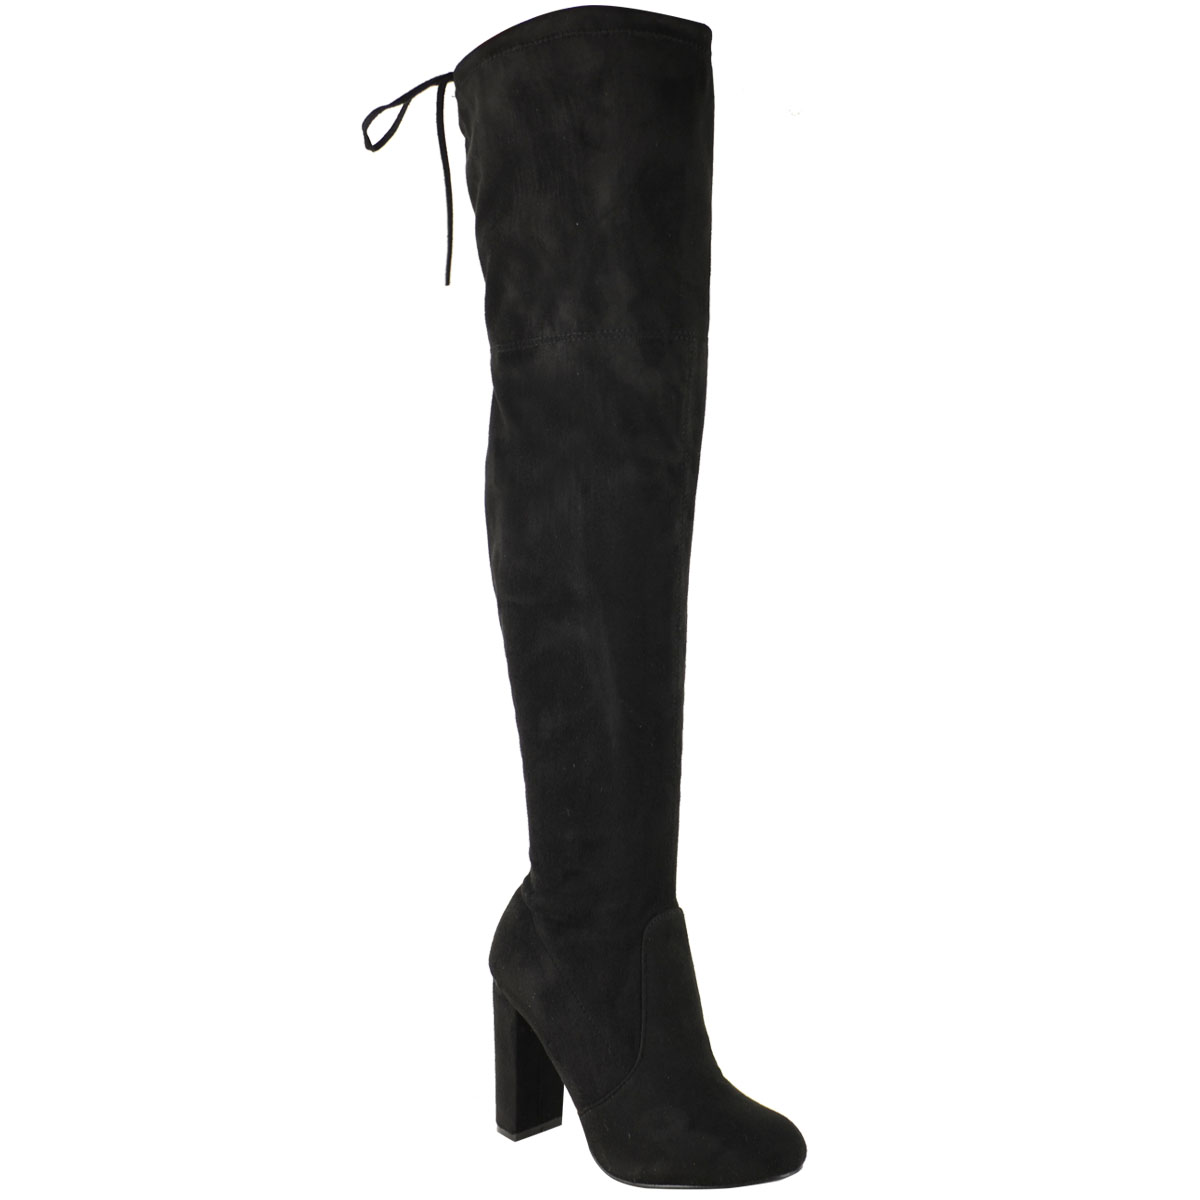 Womens Thigh High Boots Ladies Stretchy Over The Knee Long Plain Heel Shoes Size 